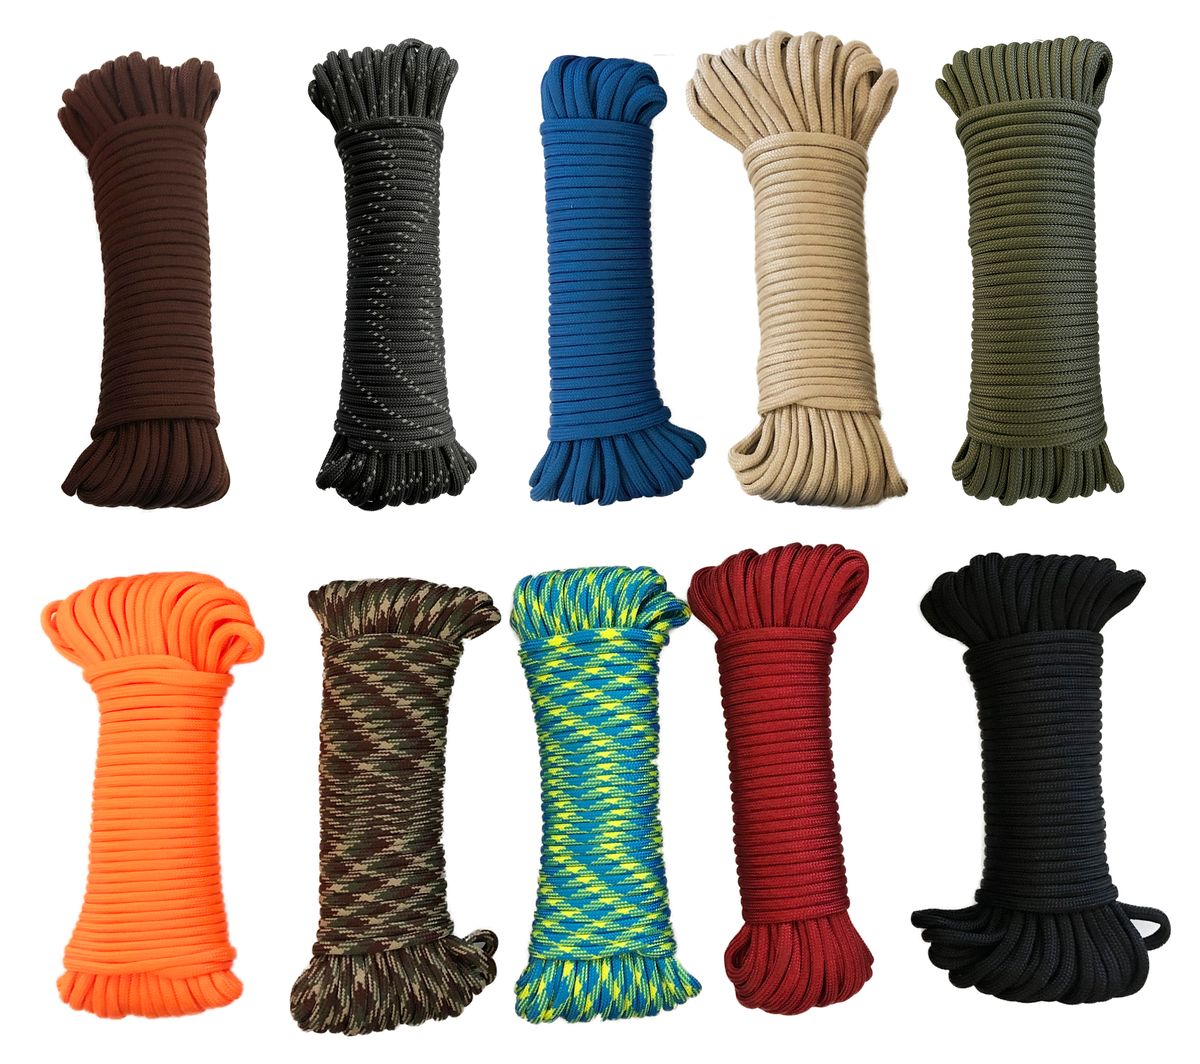 Paracord 550 Type III - 100% Nylon - Variety 10 Pack, Shop Today. Get it  Tomorrow!